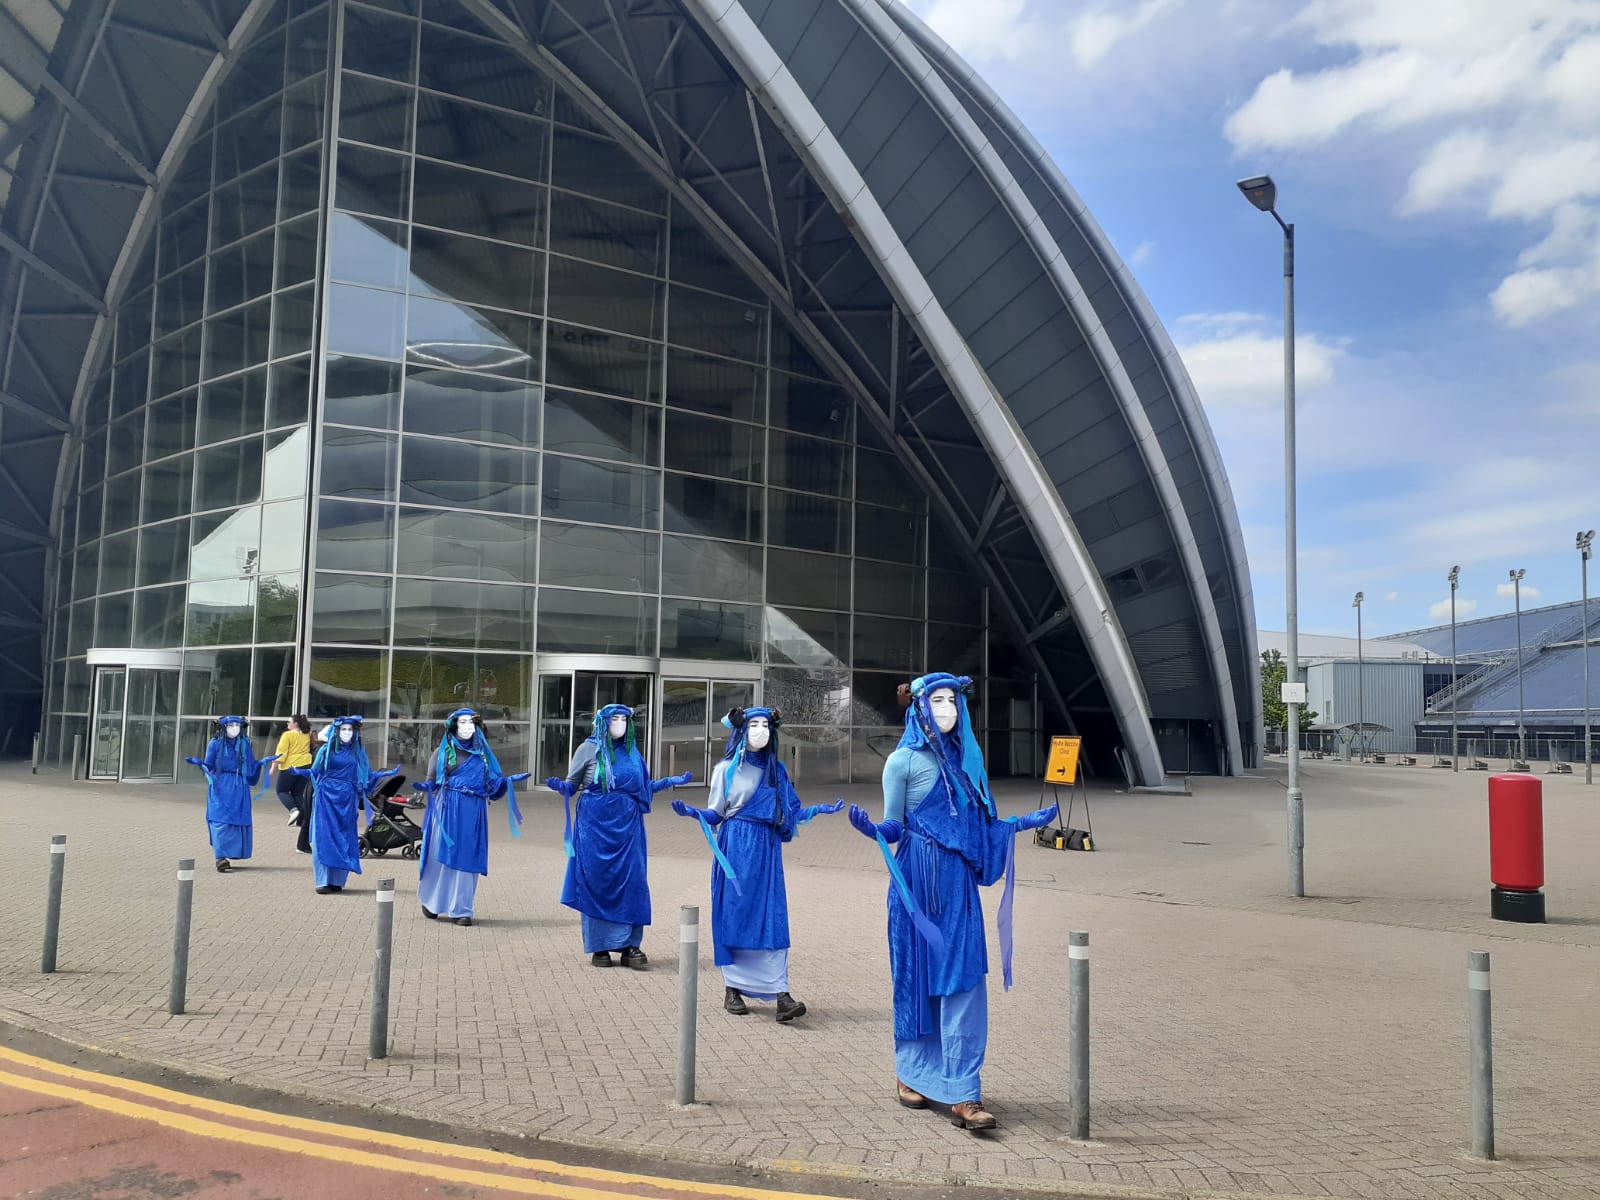 Glasgow: The Blue Rebels performed outside the SSE Hydro.